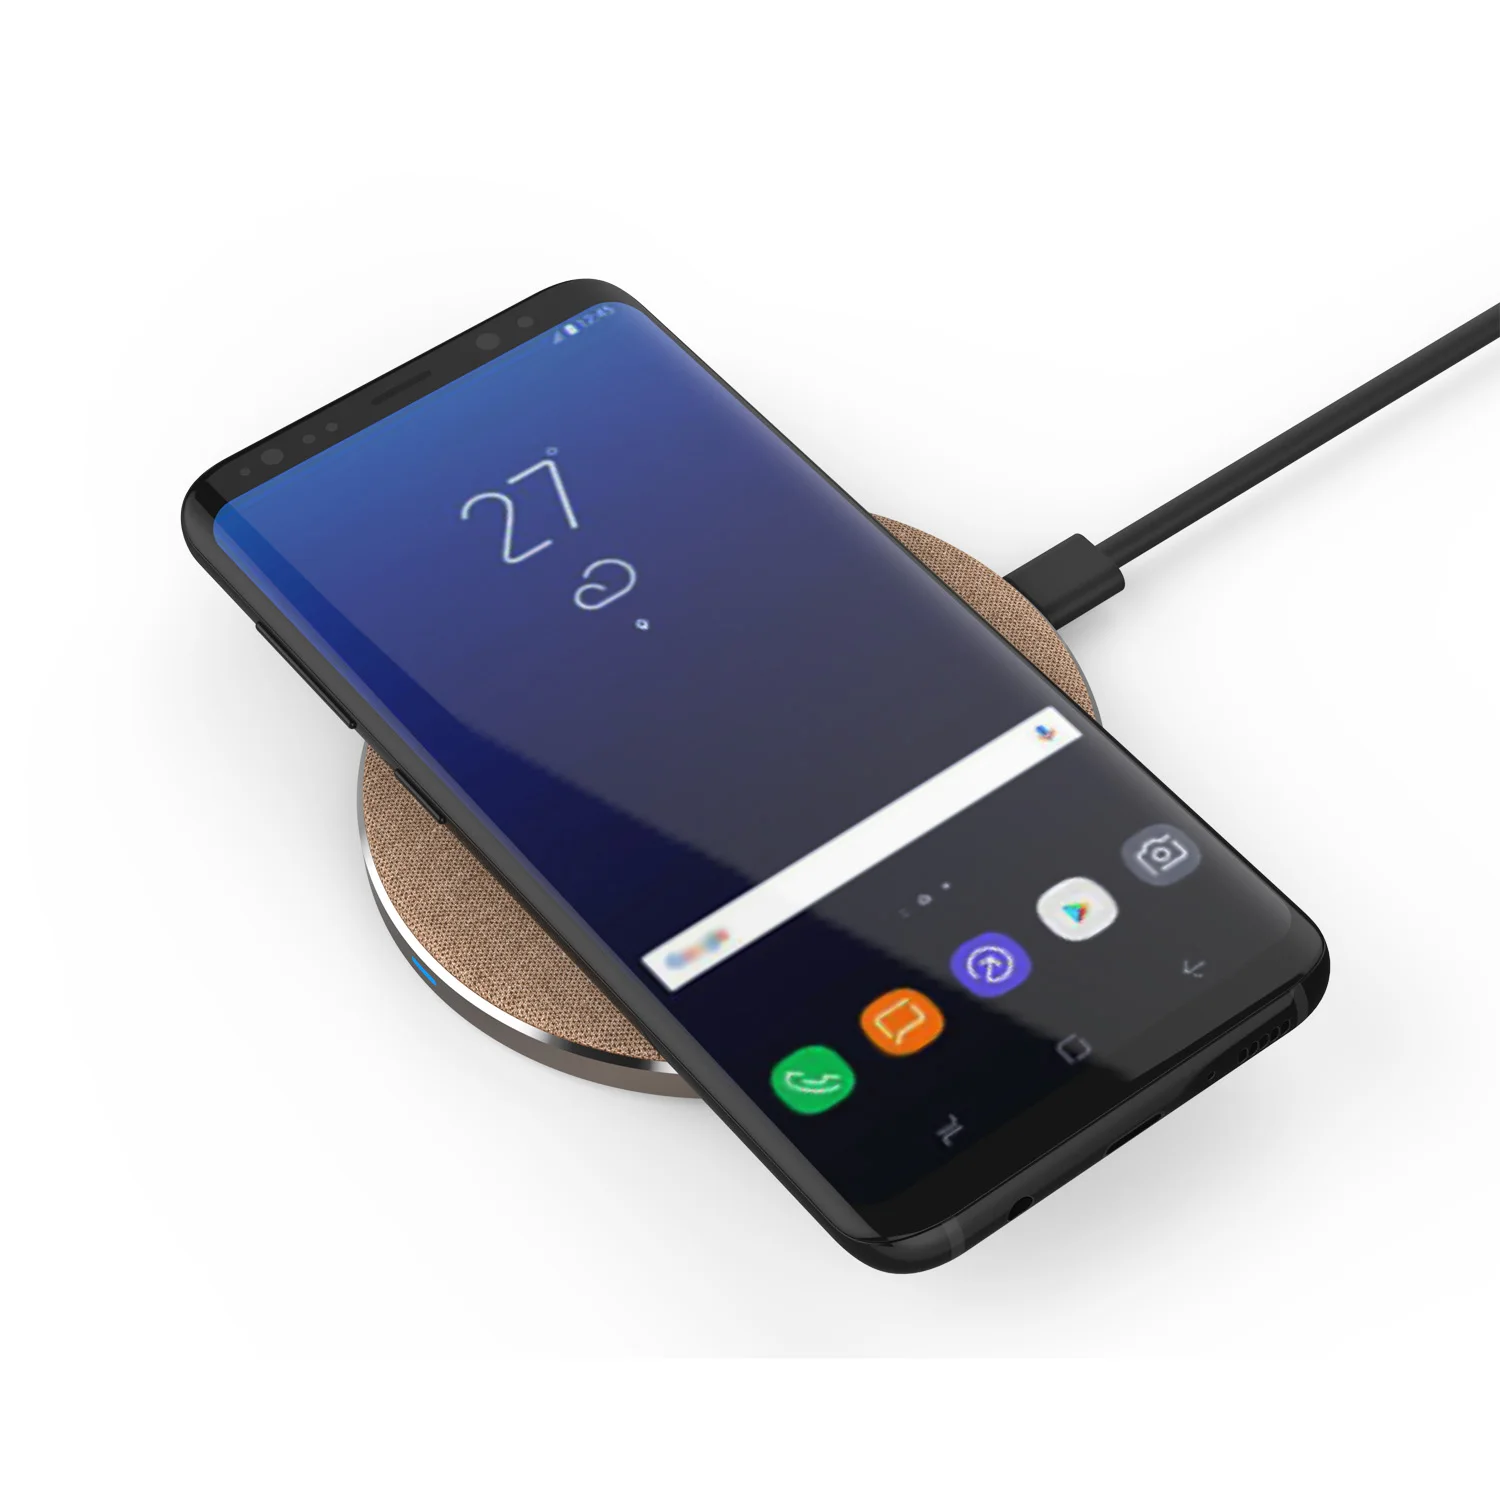 Amazon Bestseller Electrical Gadgets Wireless Phone Charger Pad For